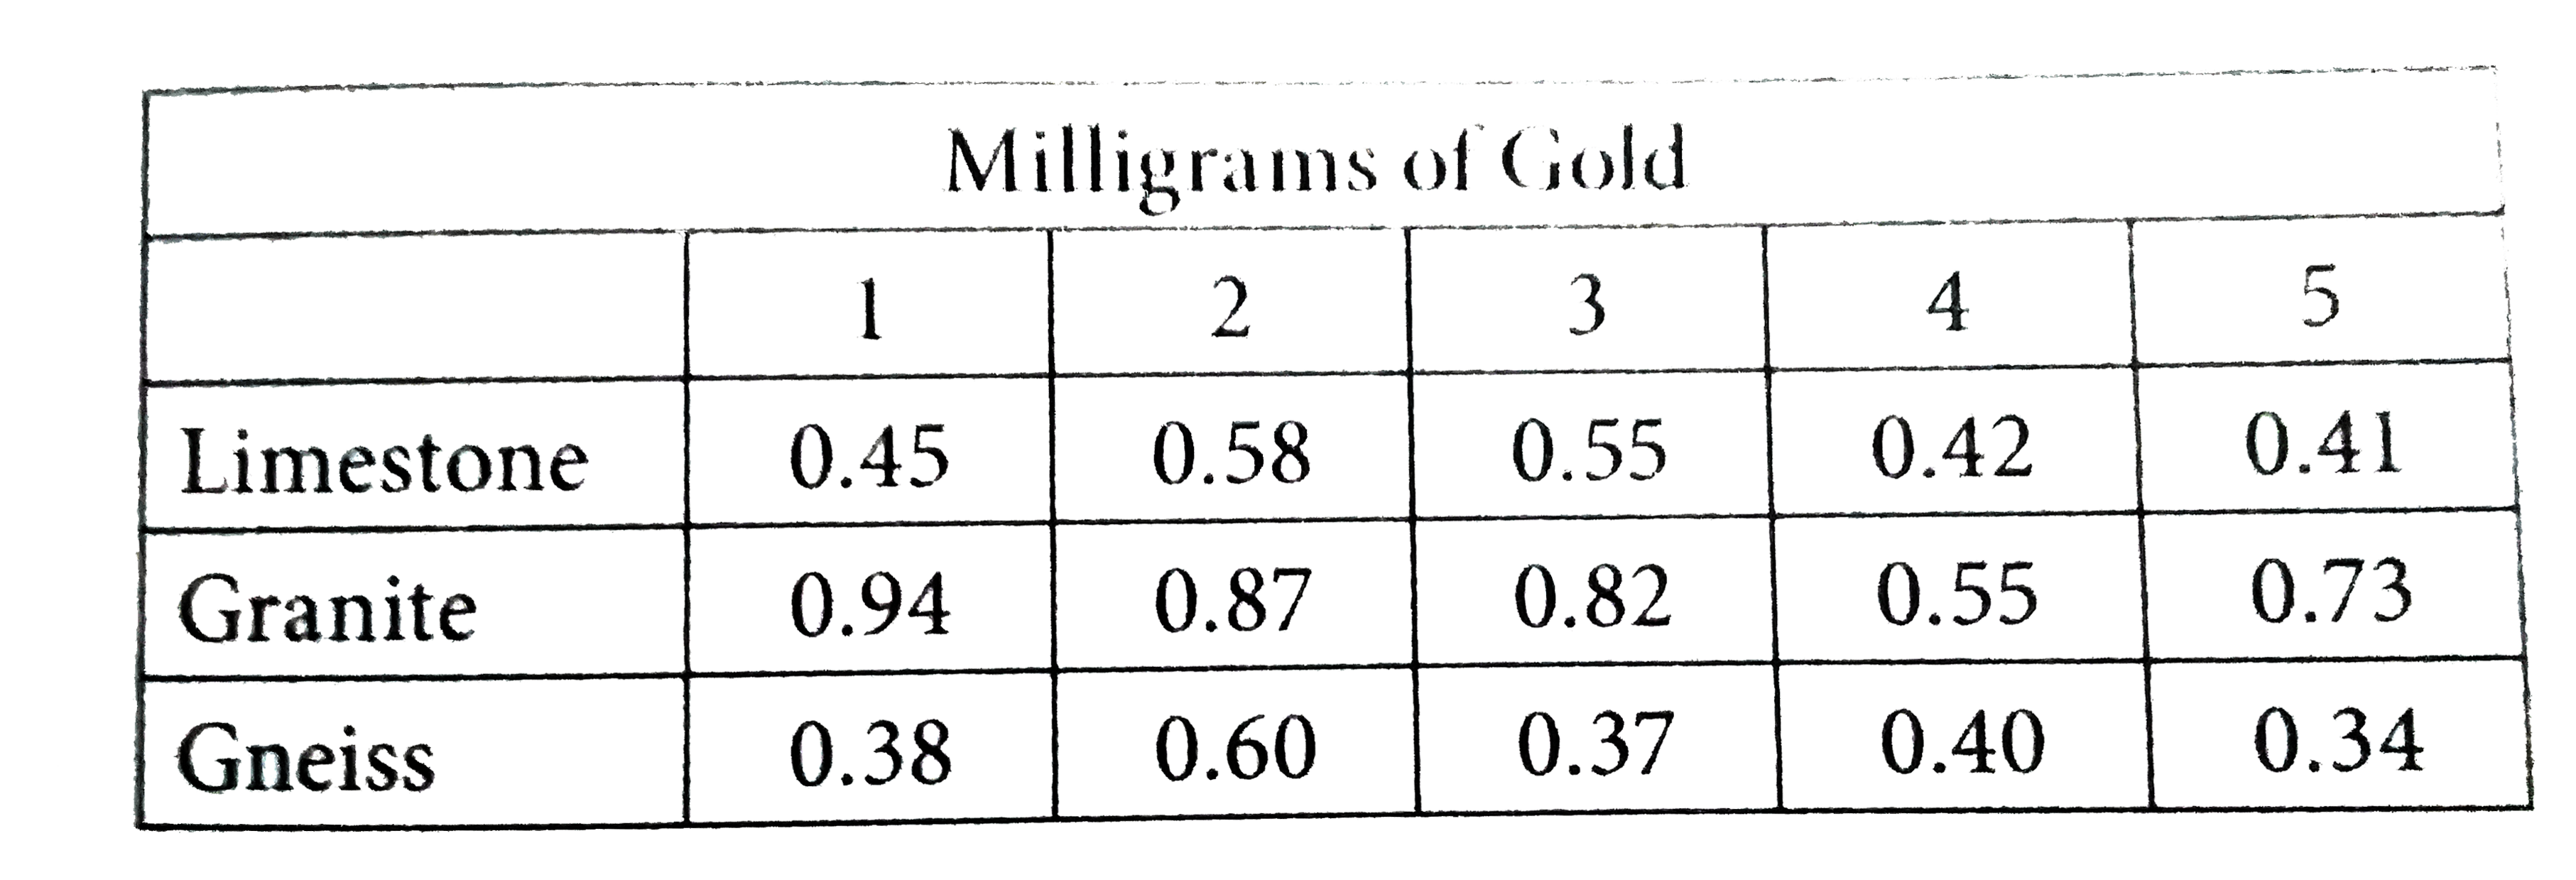 Five samples of each of three different rock types were collected on a hiking trip in Colorado. Each sample was analyzed for its gold content. The milligrams of gold found in each sample are presented in the table above. How much larger is the median of the amount of gold in the granite samples than that of the limestone samples?